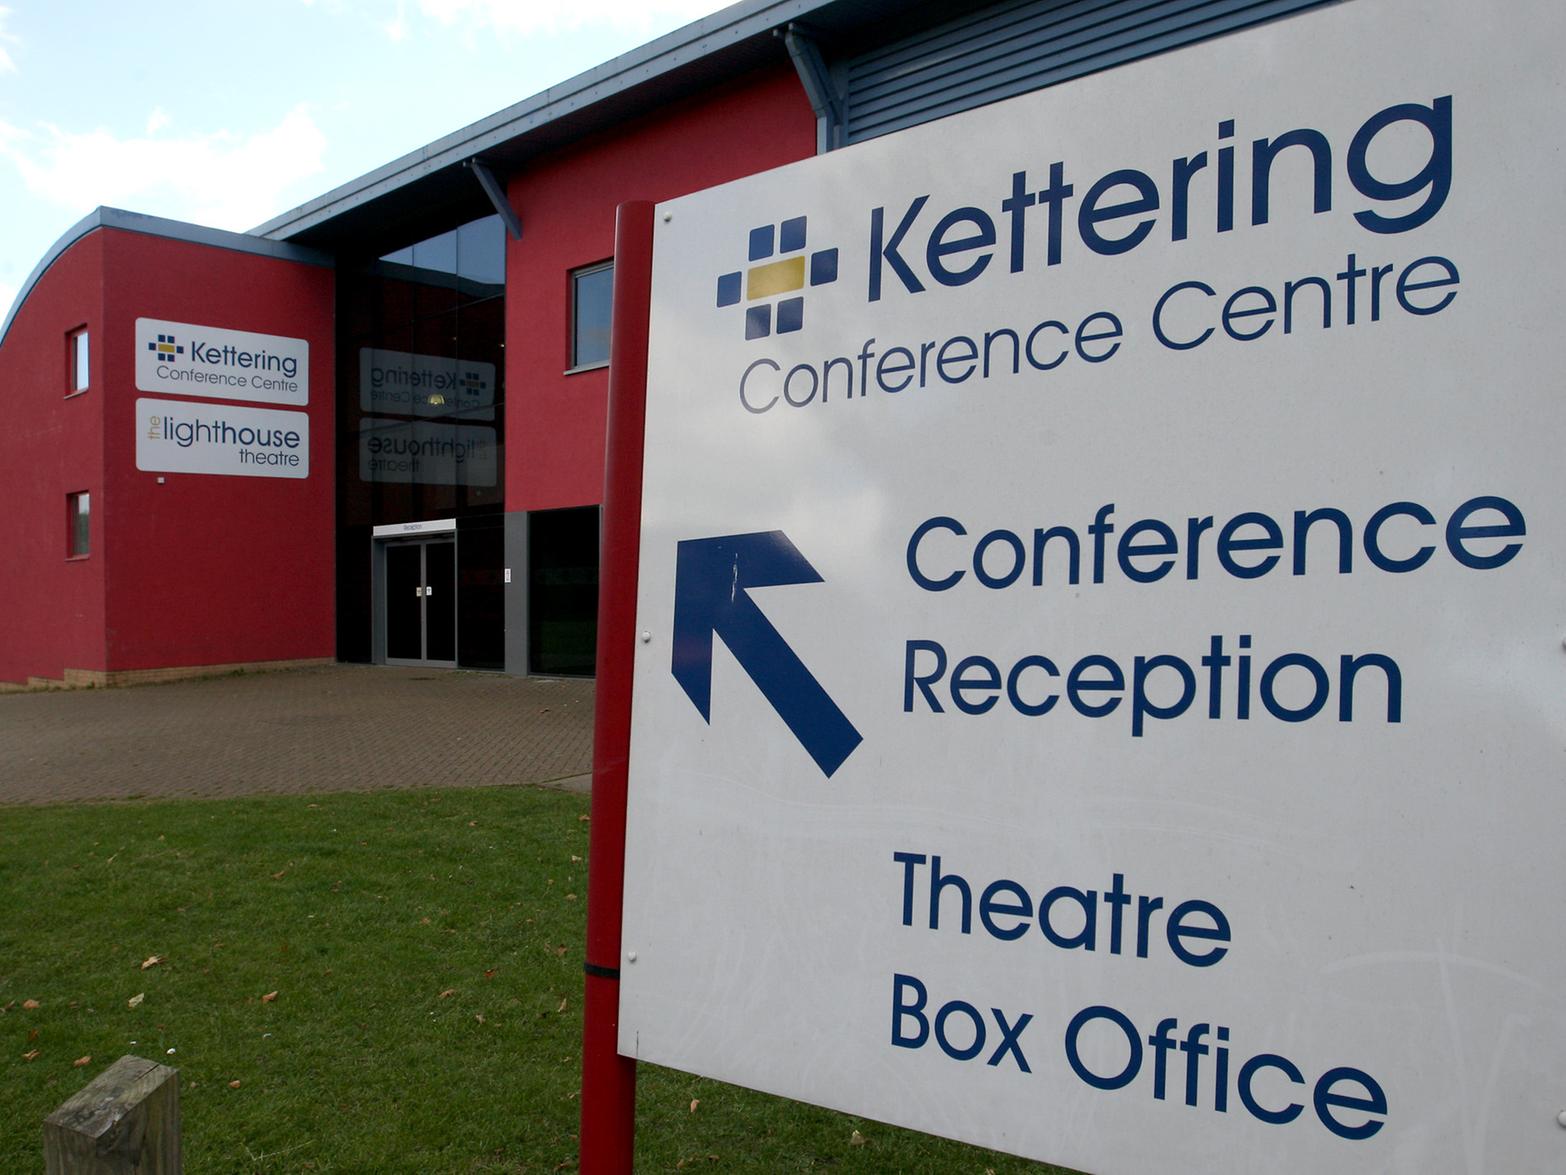 Kettering Conference Centre is one of the area's biggest venues - it can accommodate up to 1,500 people and has its own Asian wedding brochure.